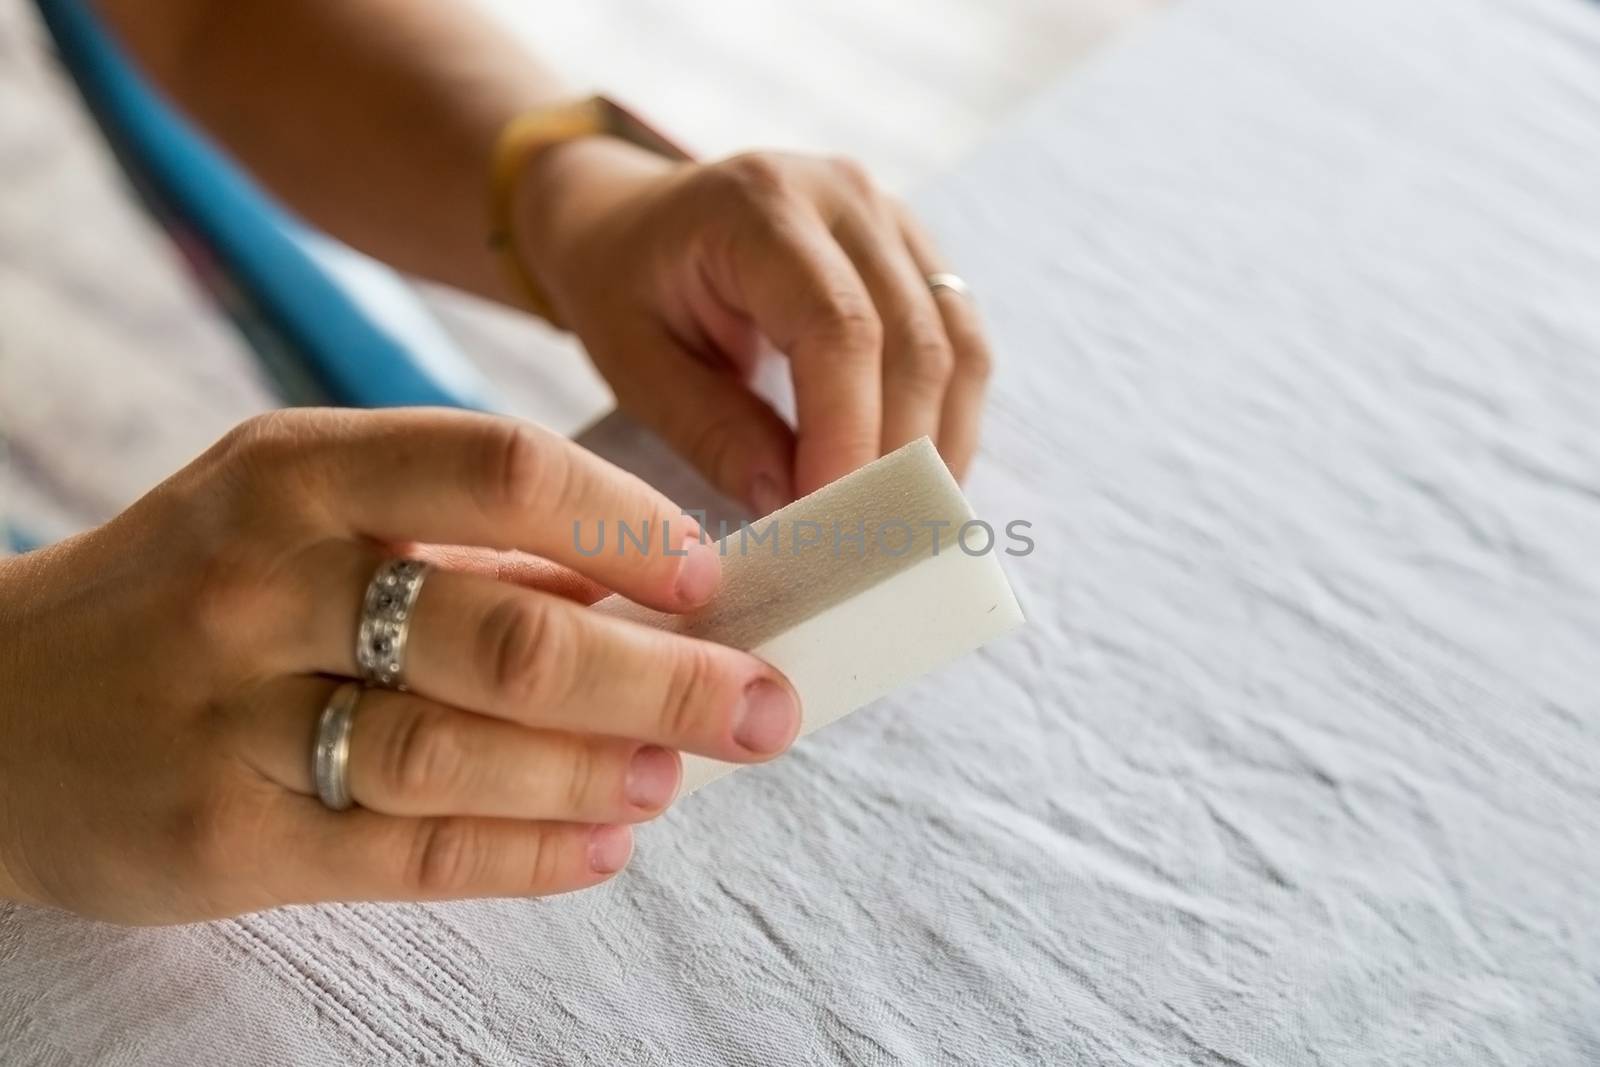 Removing varnish or degreasing nails. Preparation of nails for staining with varnish. Self manicure during self-isolation with coronovirus.